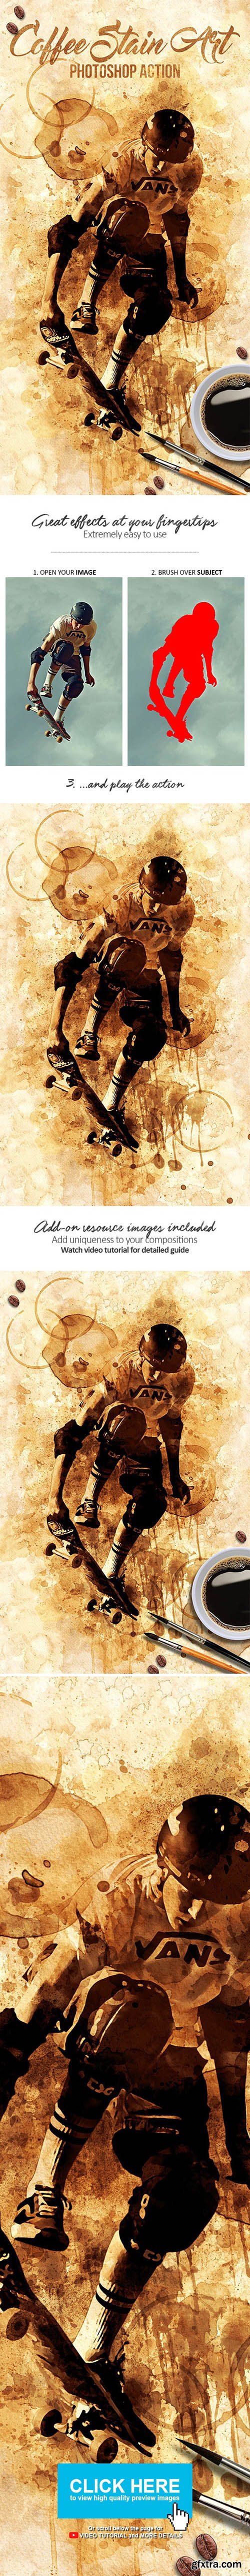 GraphicRiver - Coffee Stain Art Photoshop Action 19452915